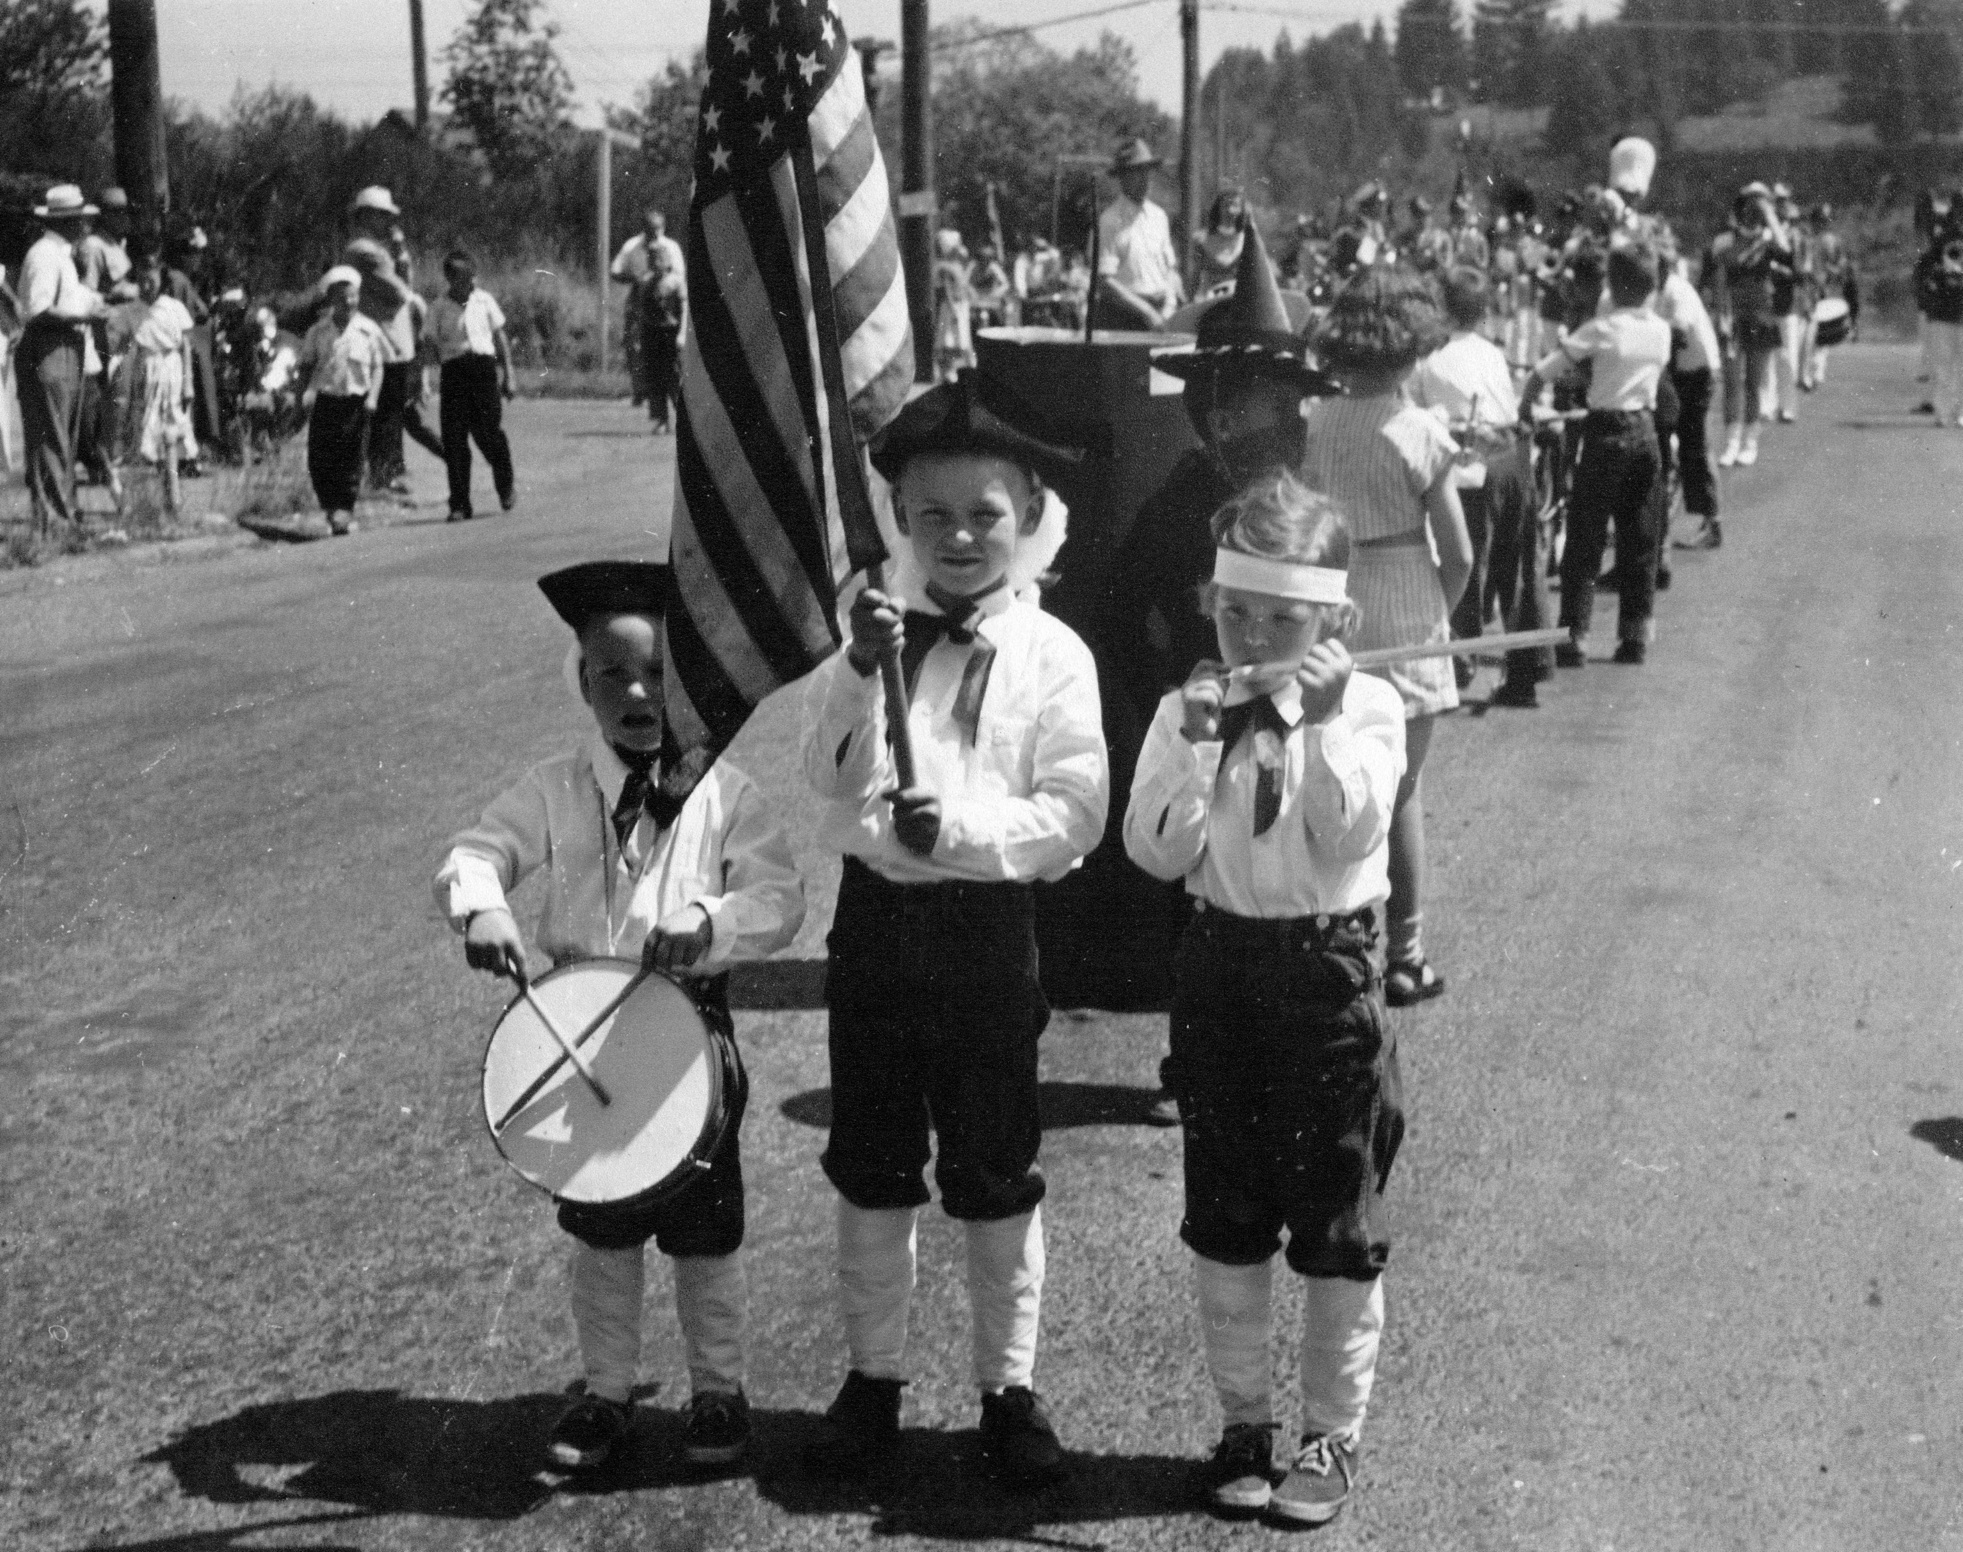 Three children dressed as the "Spirit of '76" from the classic painting, probably in the 1952 parade.